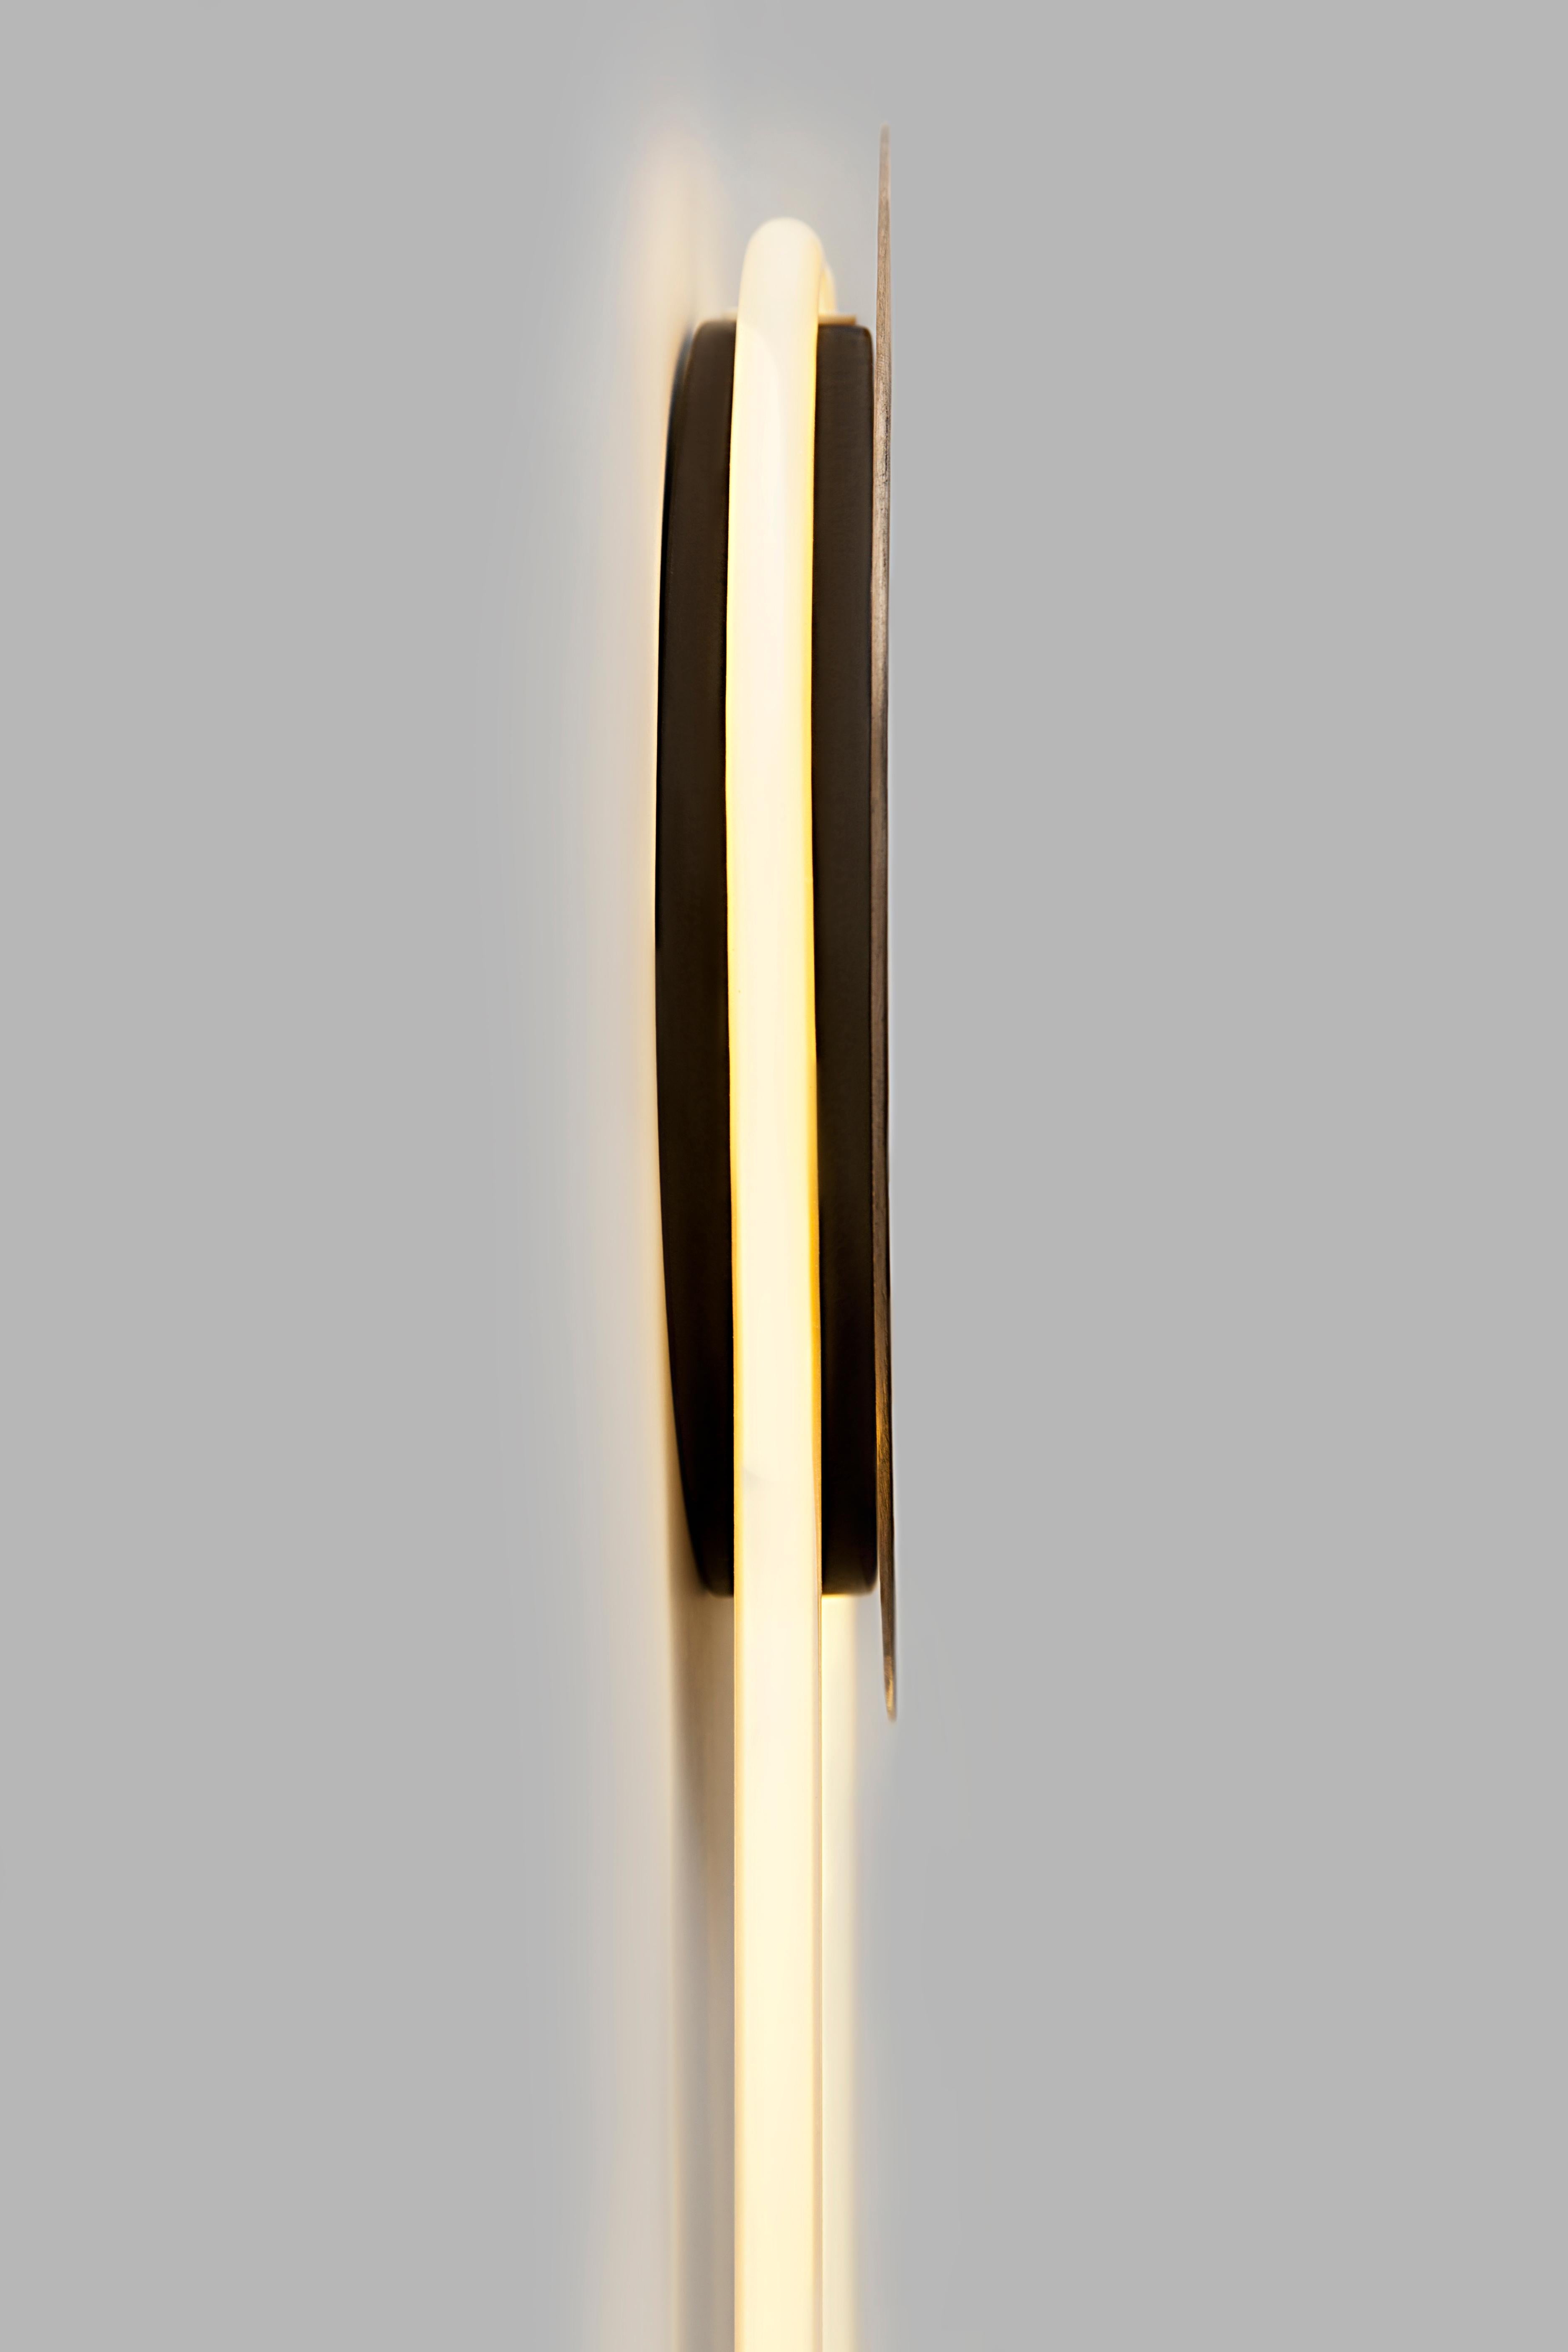 Ra Wall Short Sandy Black Hand Bent Neon Wall Sconce Lighting by Studio d'Armes In New Condition For Sale In Morin-Heights, CA